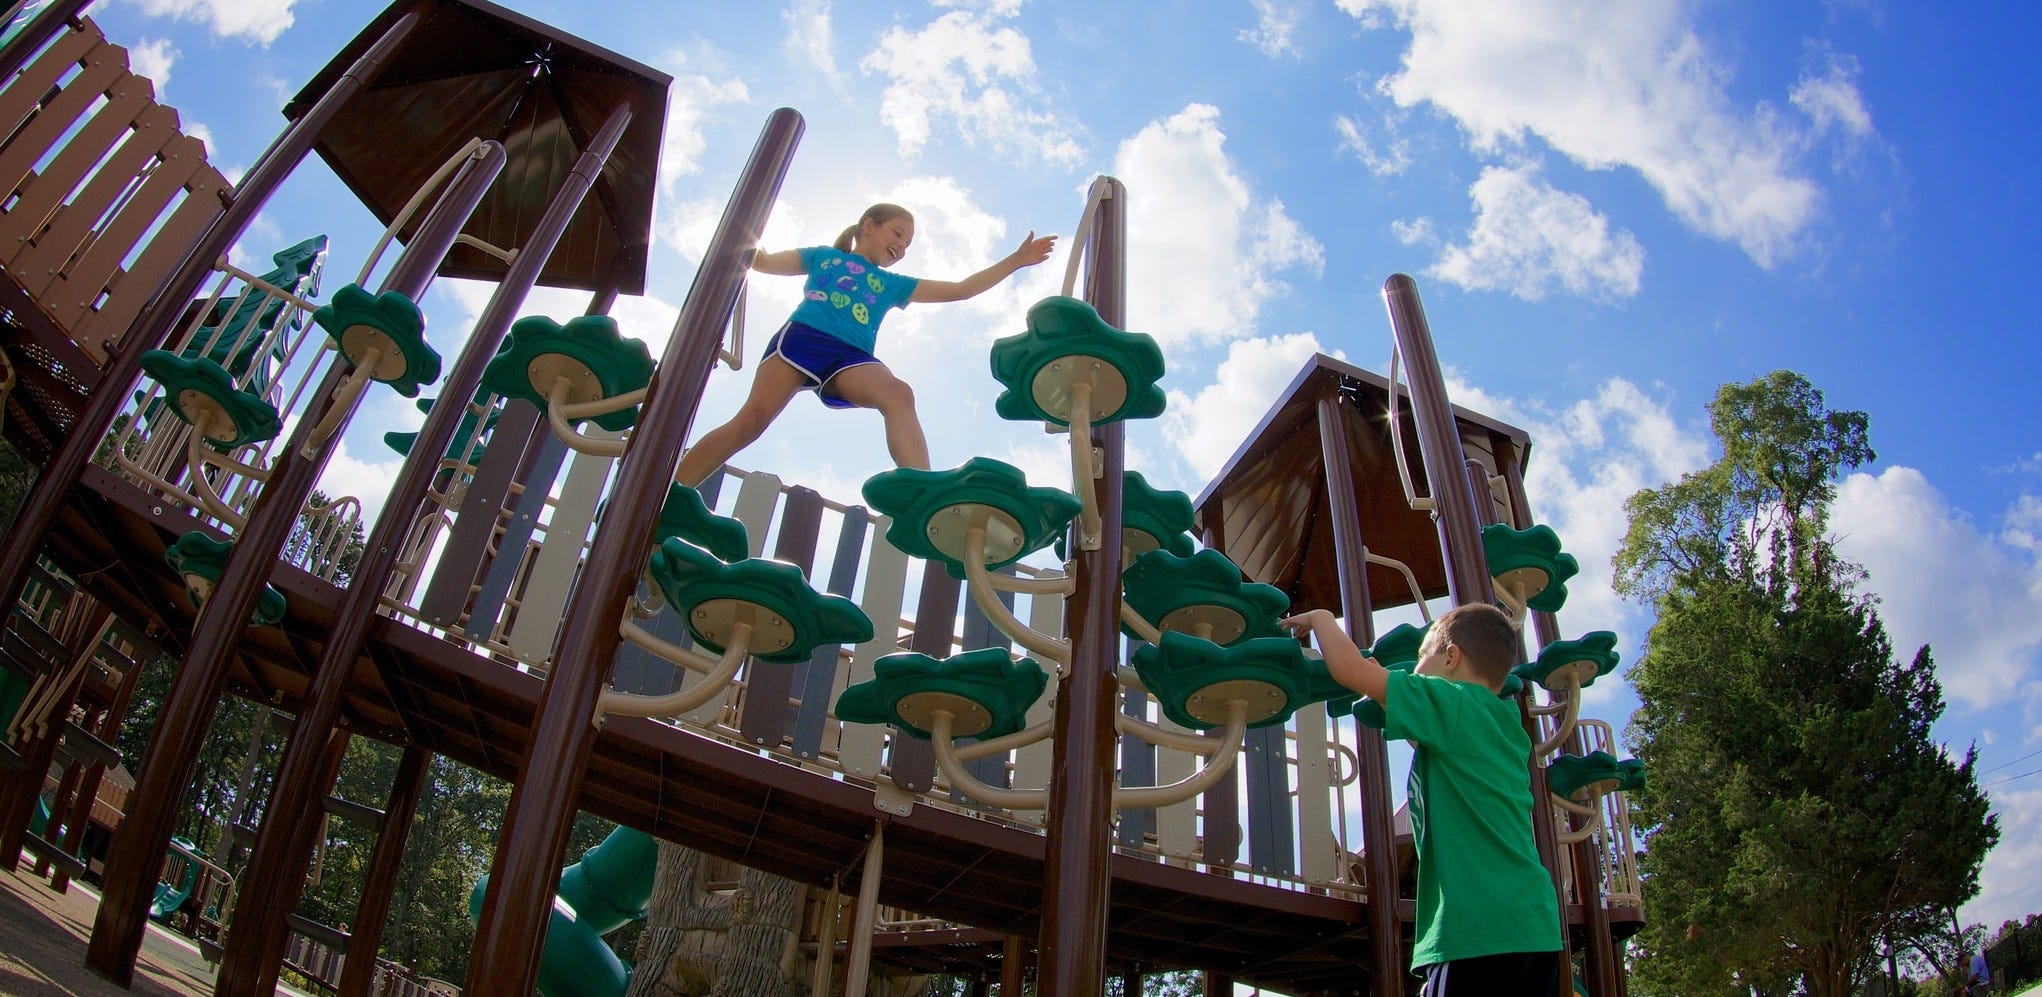 GameTime Playground Recognized for Design Excellence